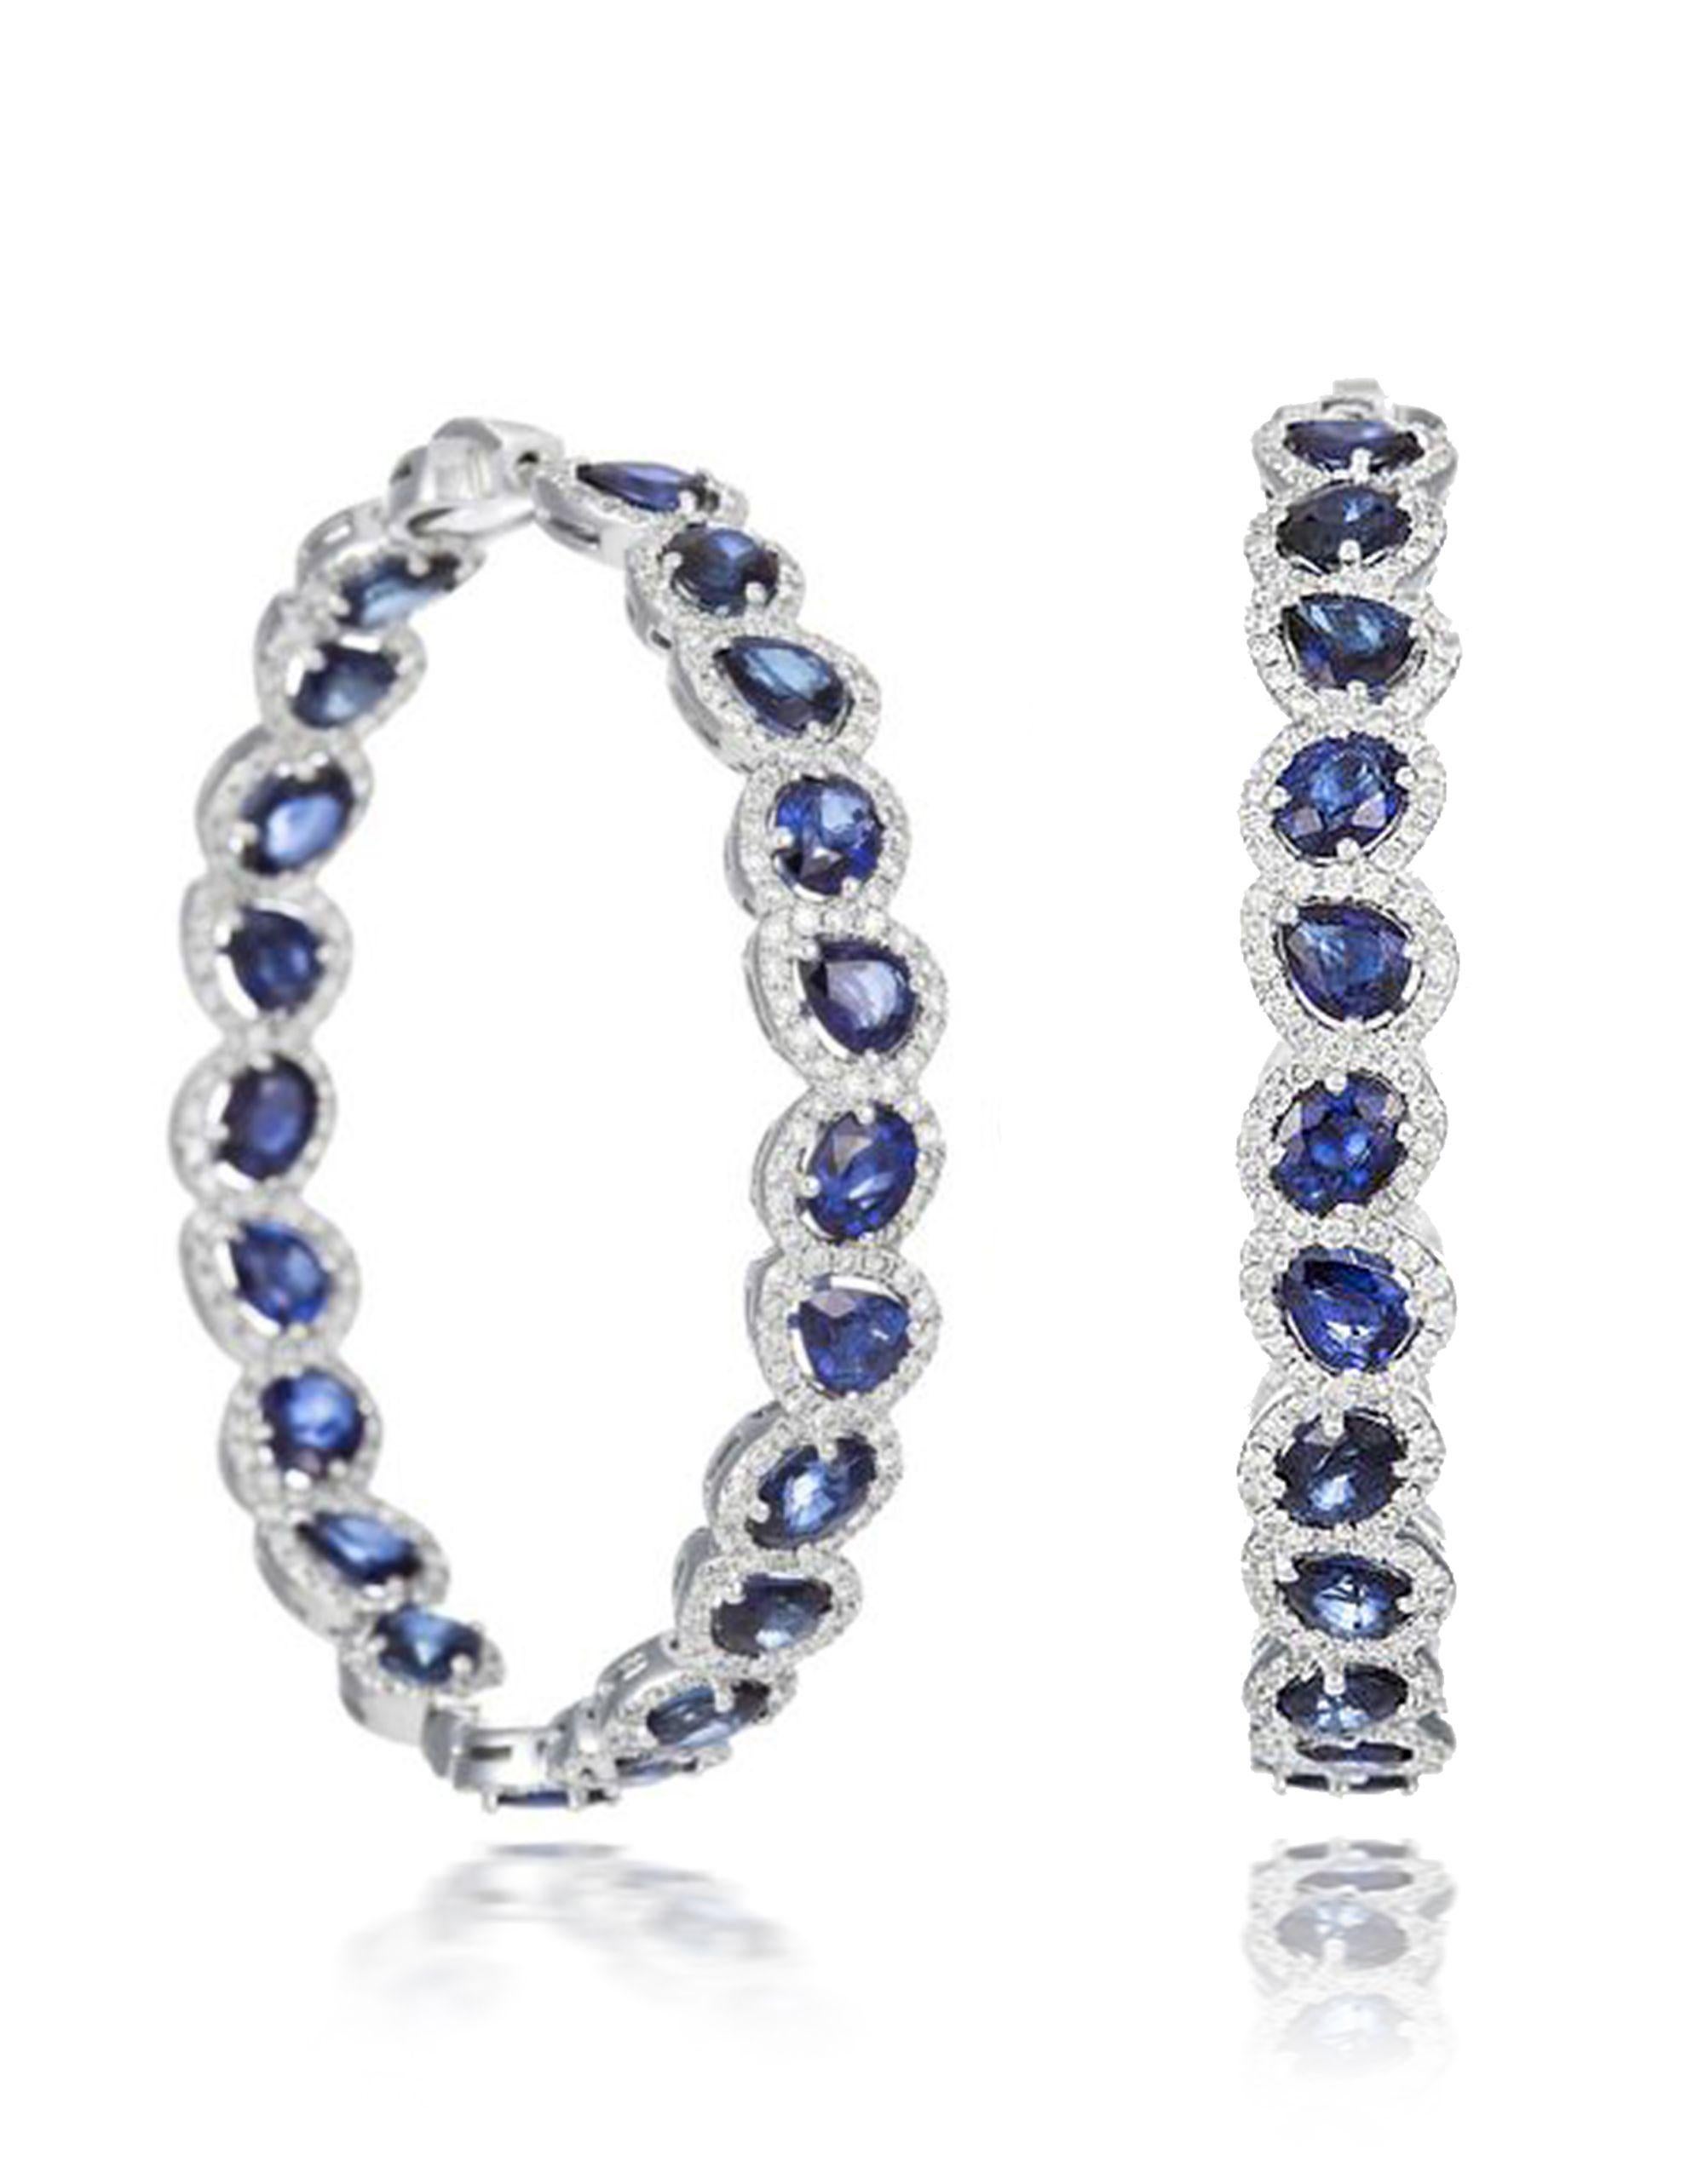 Custom designed Natural  Gemstone diamond hoop earrings consisting of 16.25 cts rose cut blue sapphires and enhanced by 3.13 cts micropave round cut diamonds.